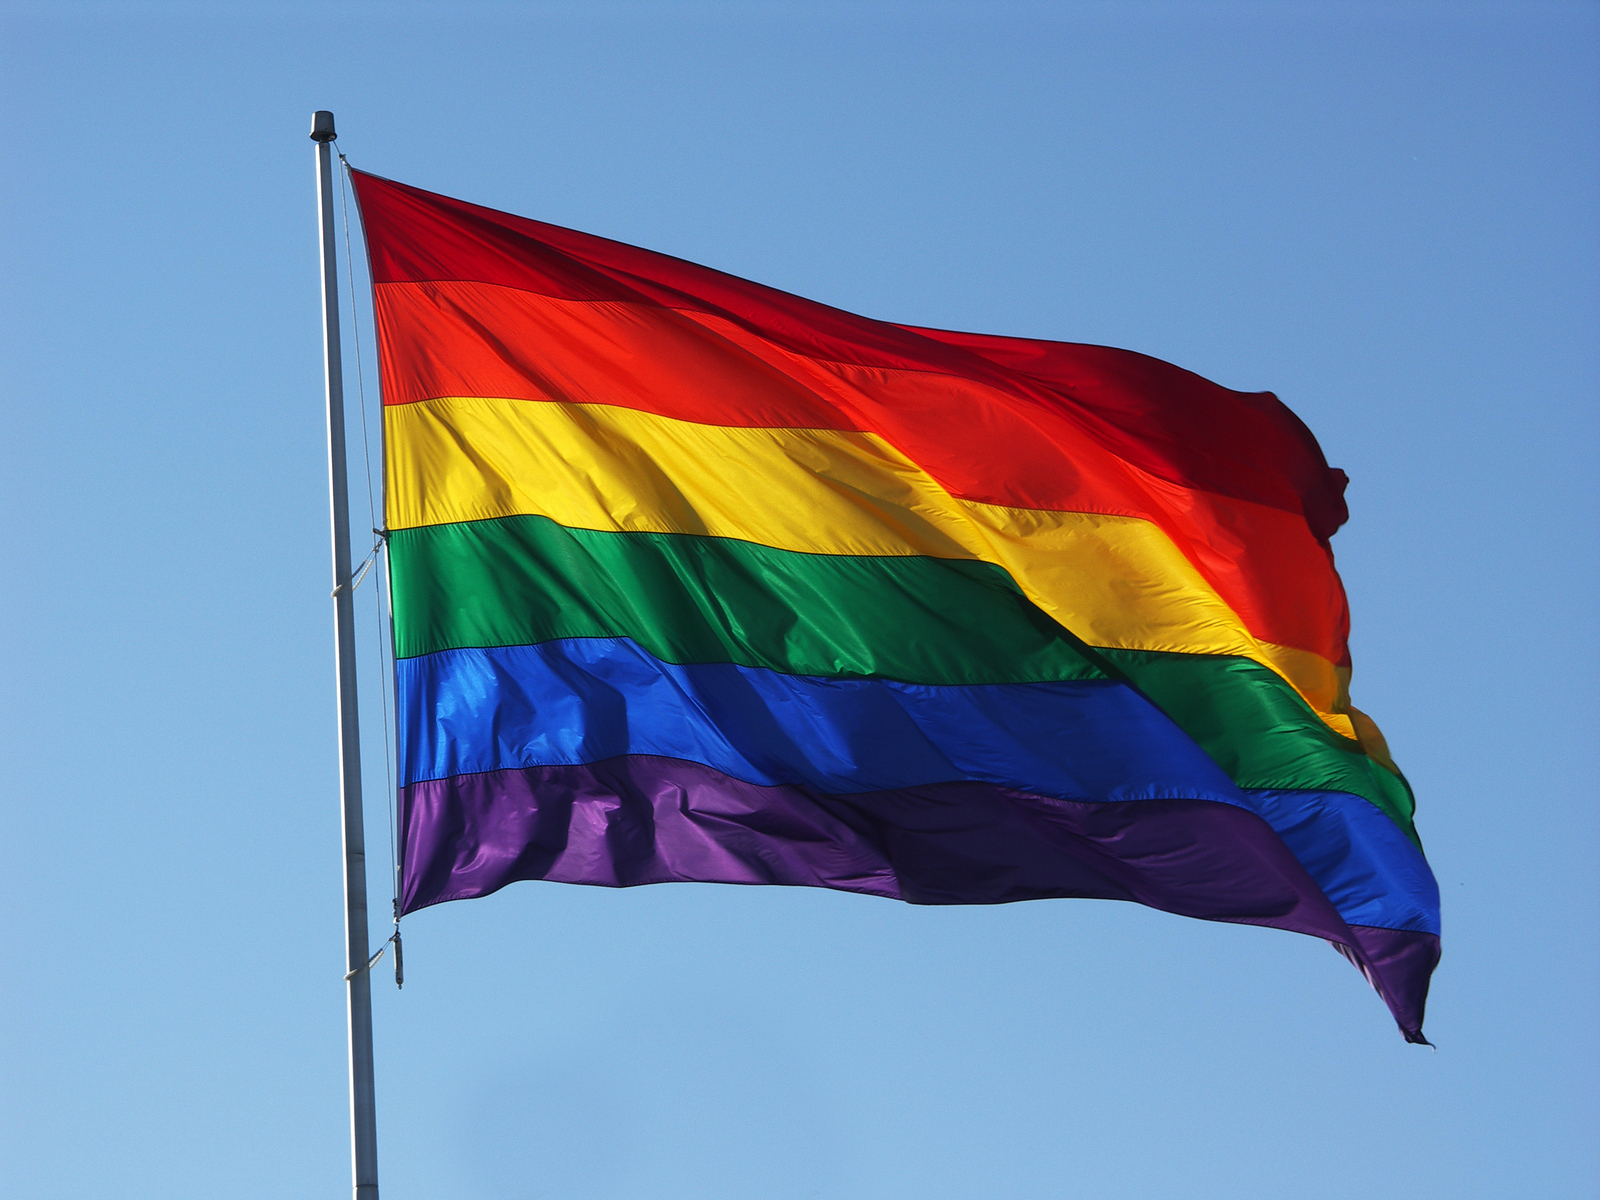 How Do Christians Respond To Pride Month? - WordSlingers